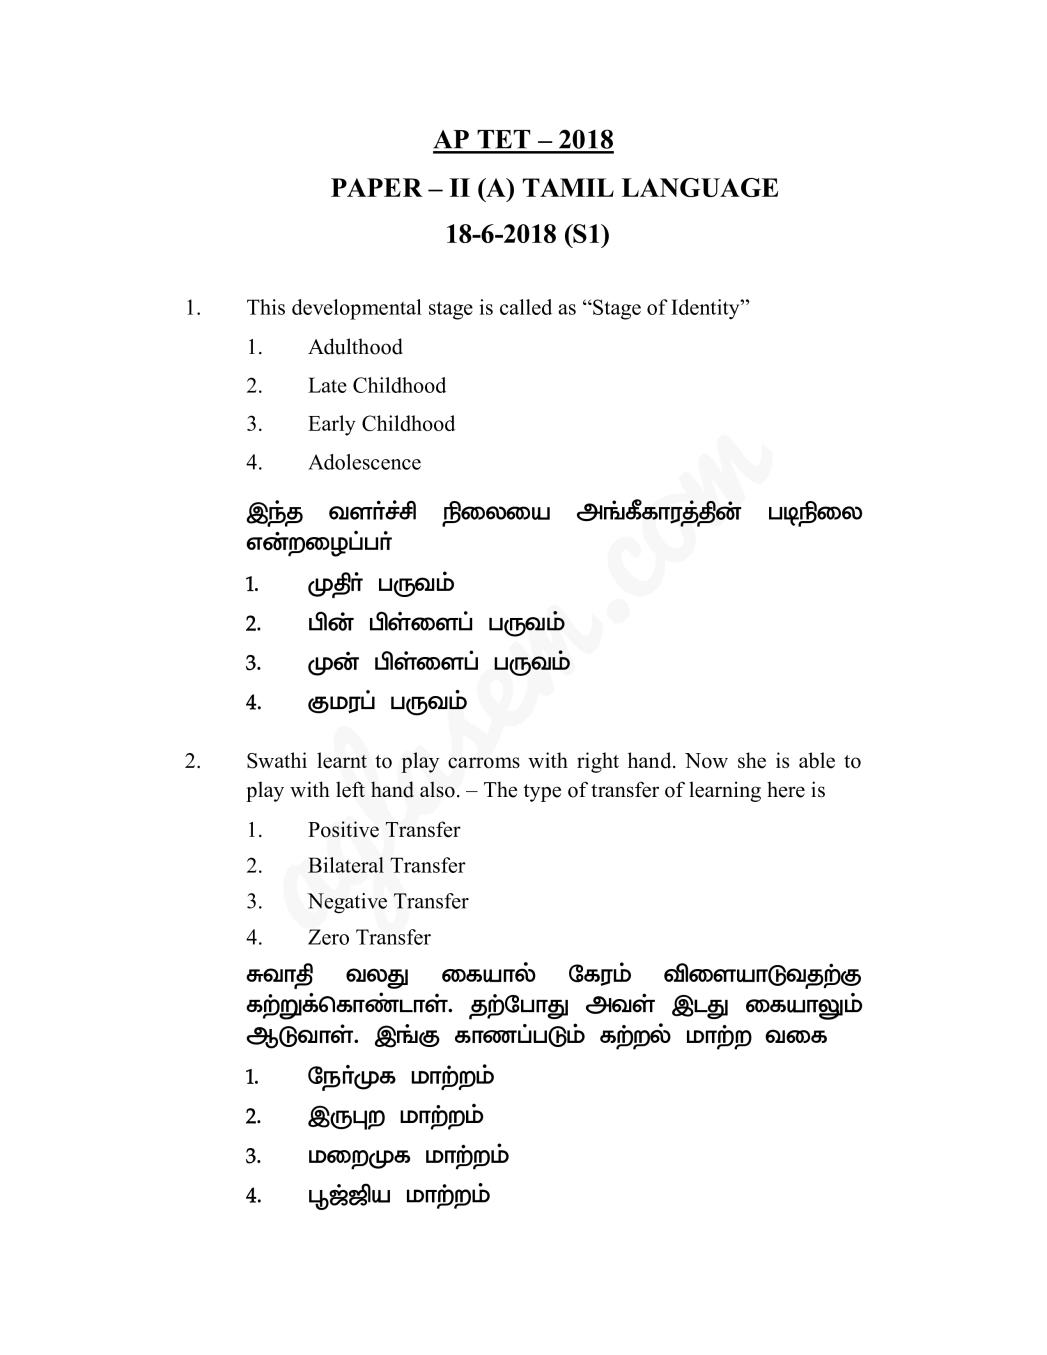 APTET Question Paper with Answers 18 Jun 2018 Paper 2 Tamil (Shift 1) - Page 1